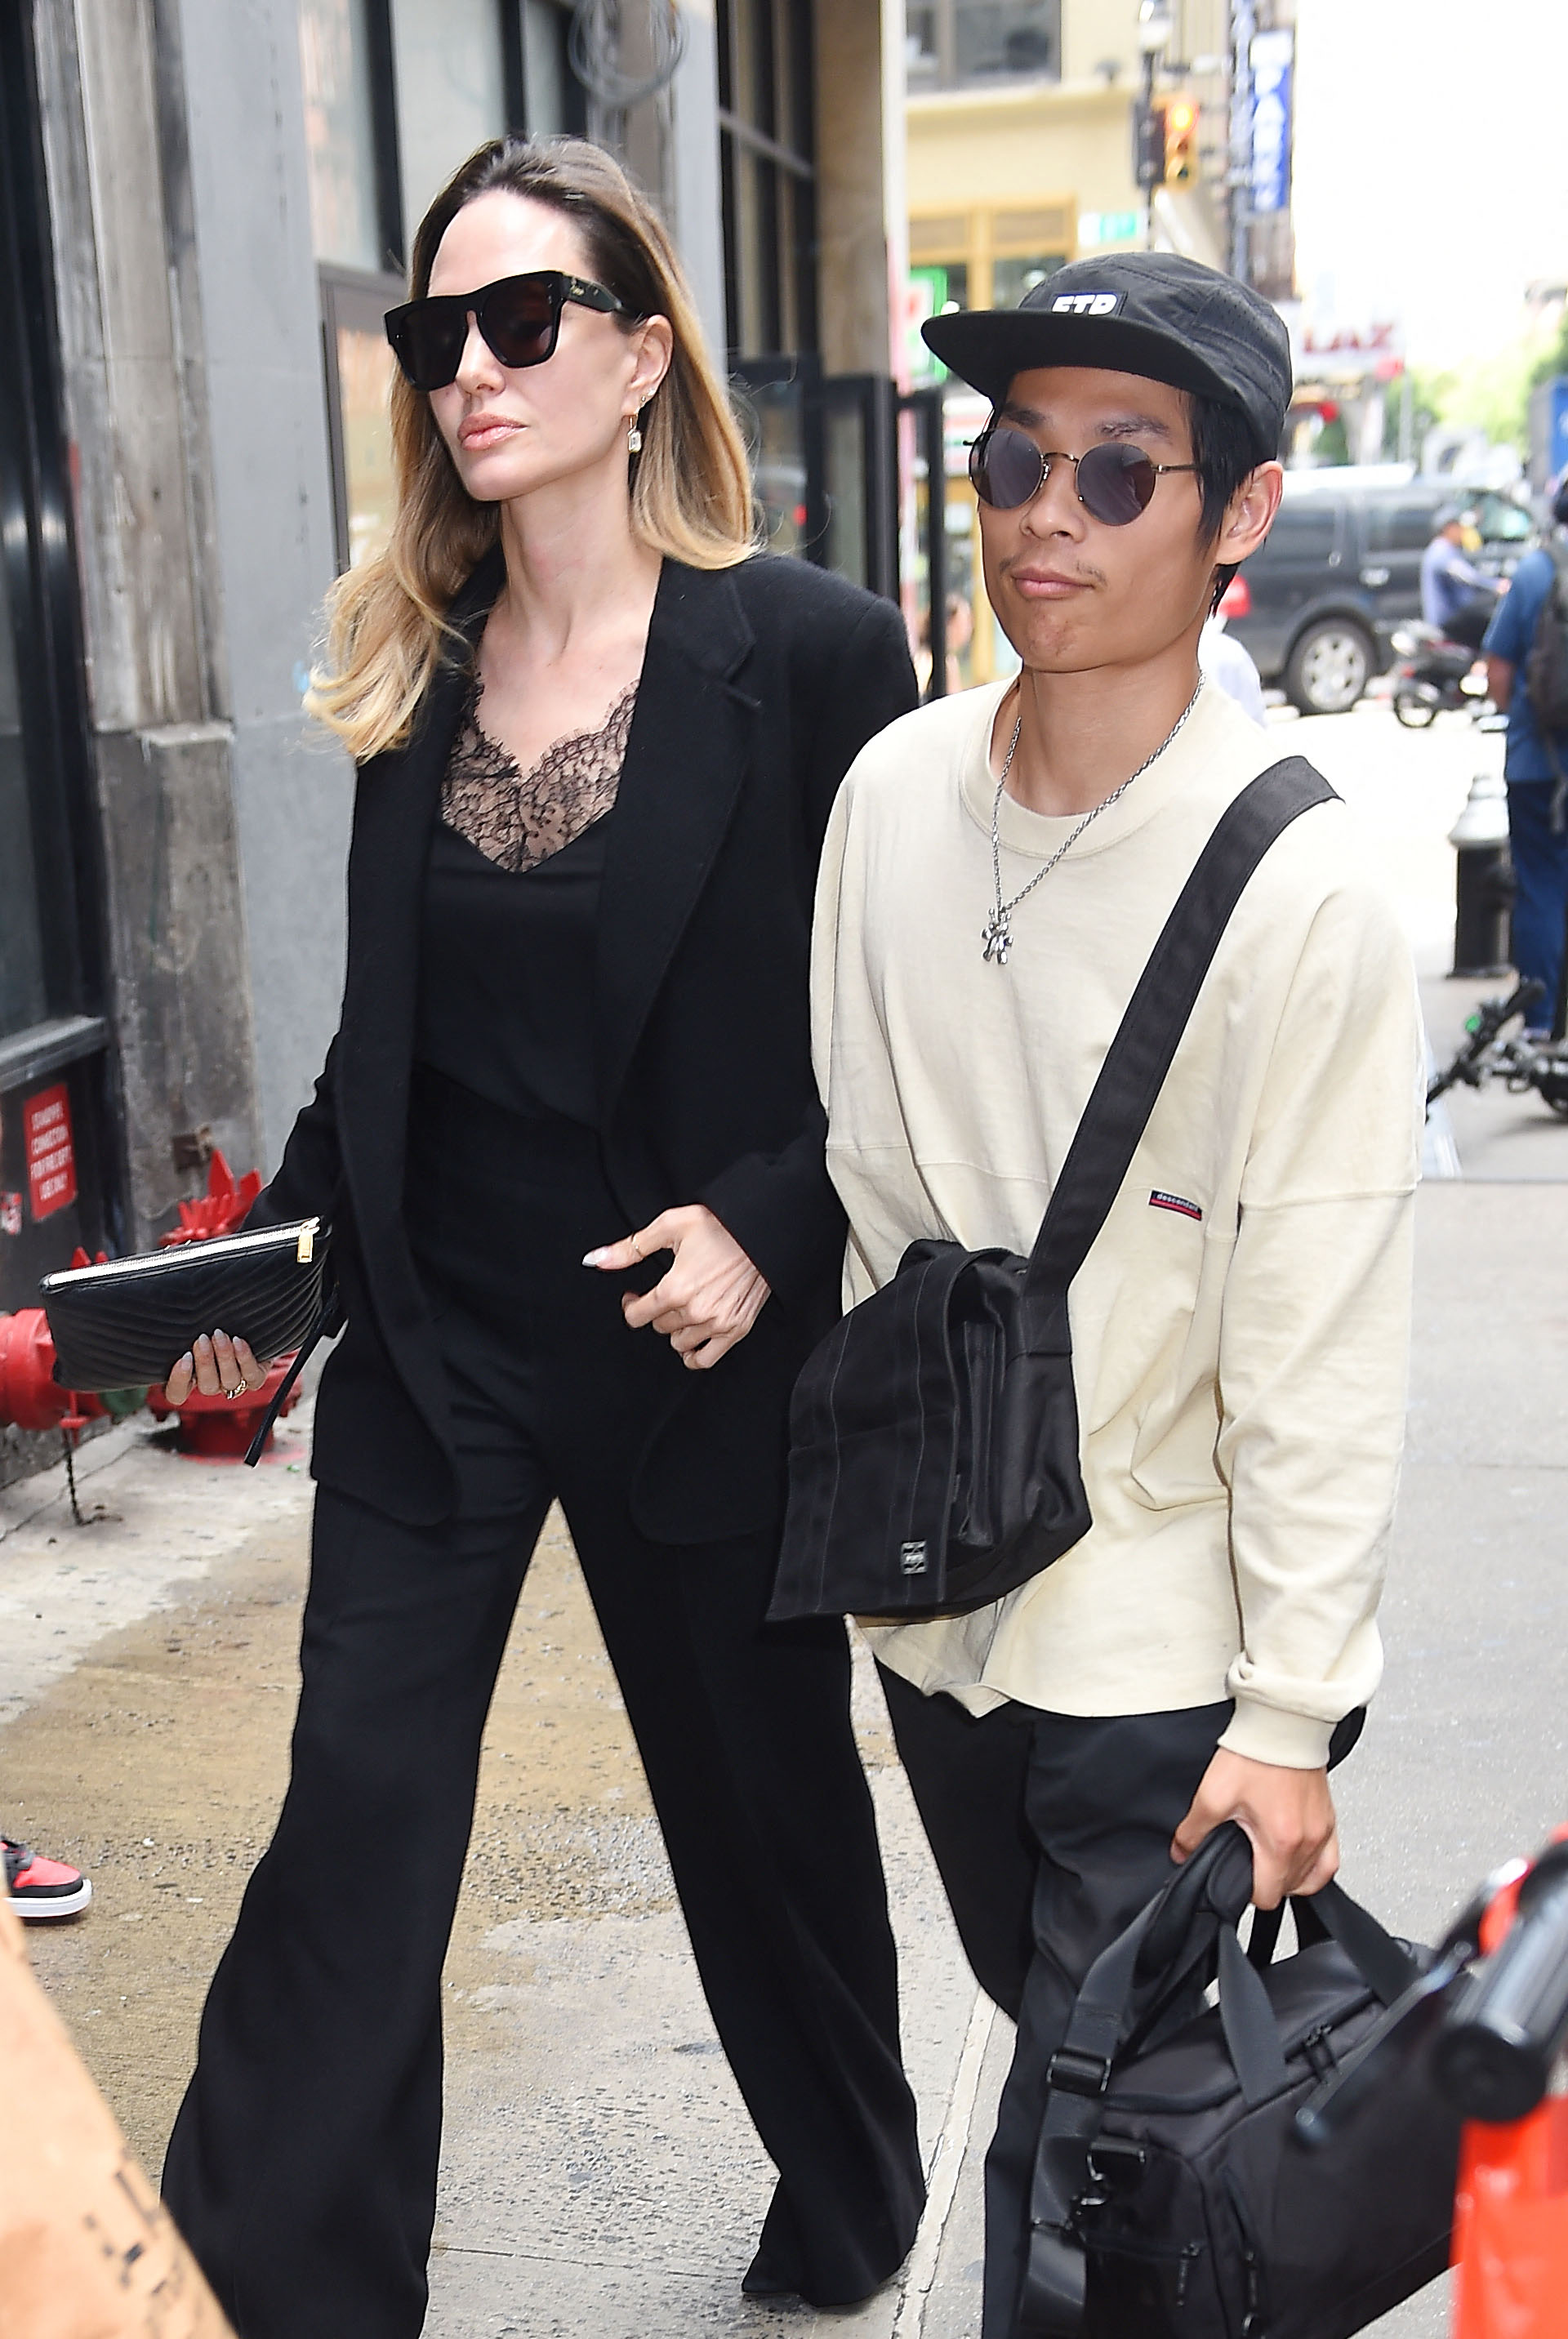 Angelina Jolie Hits the New York Streets in a Chic New Look